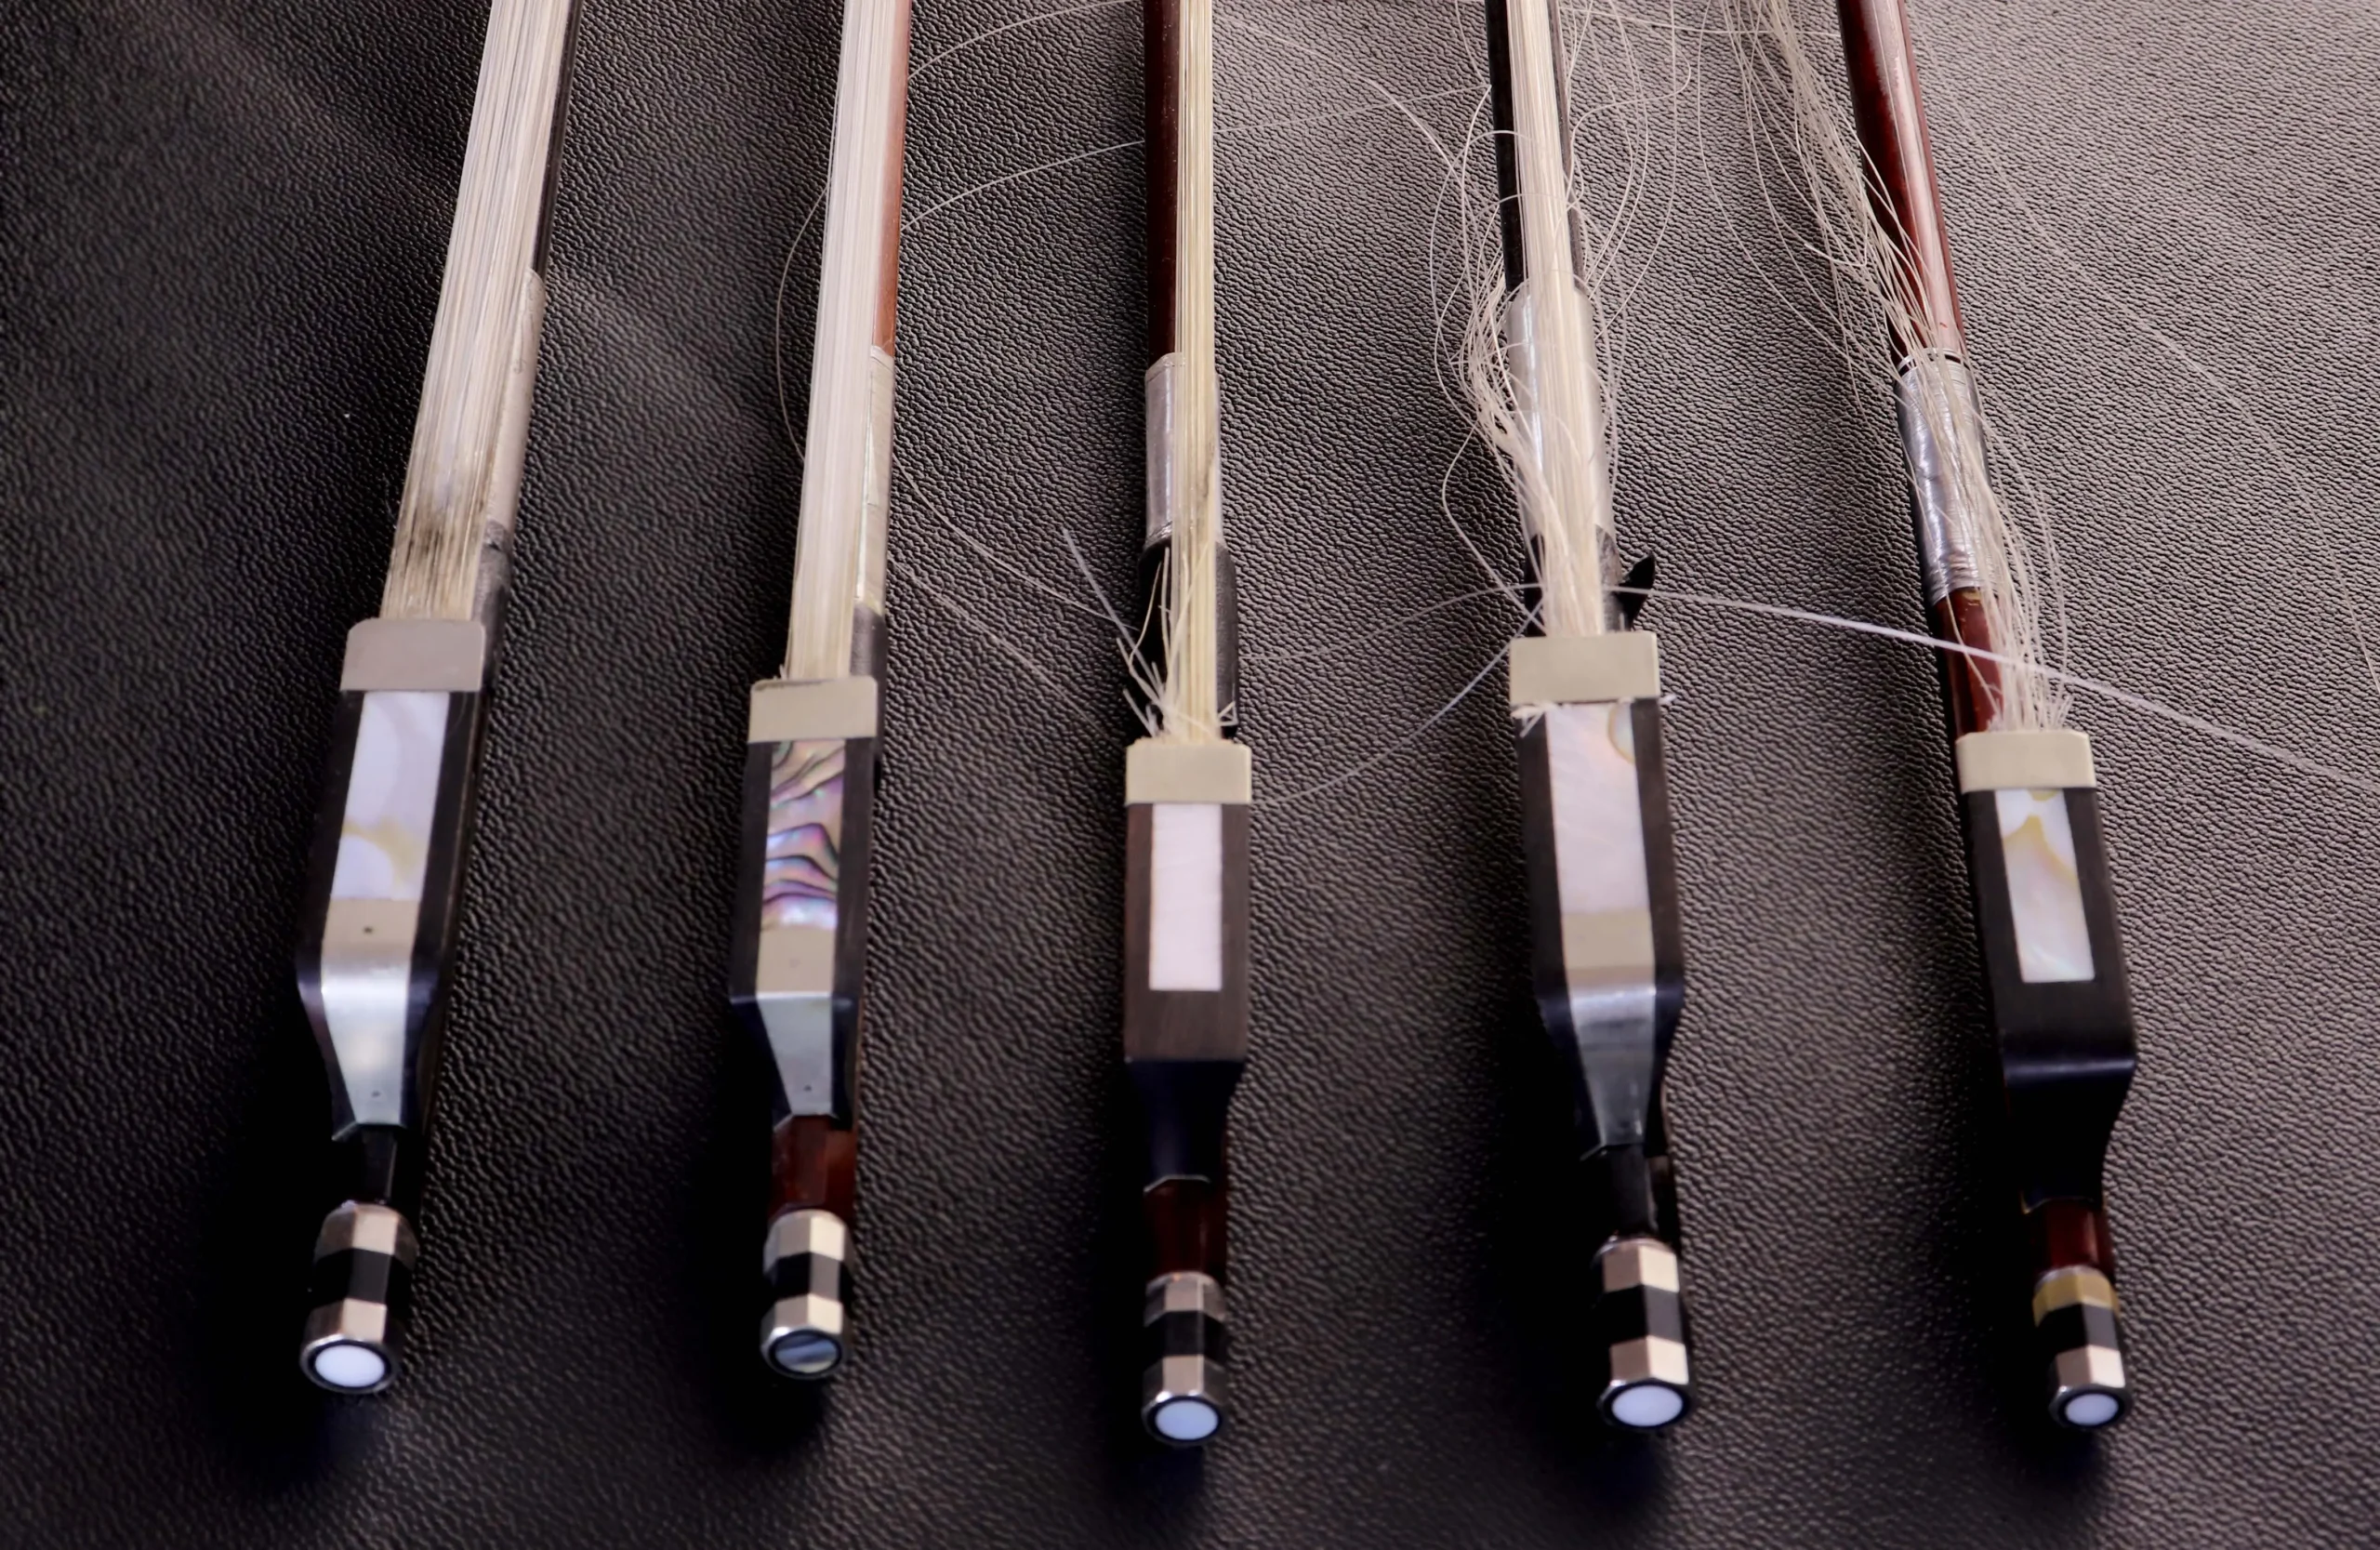 rehair violin bow cost - How much does it cost to get violin bow rehaired